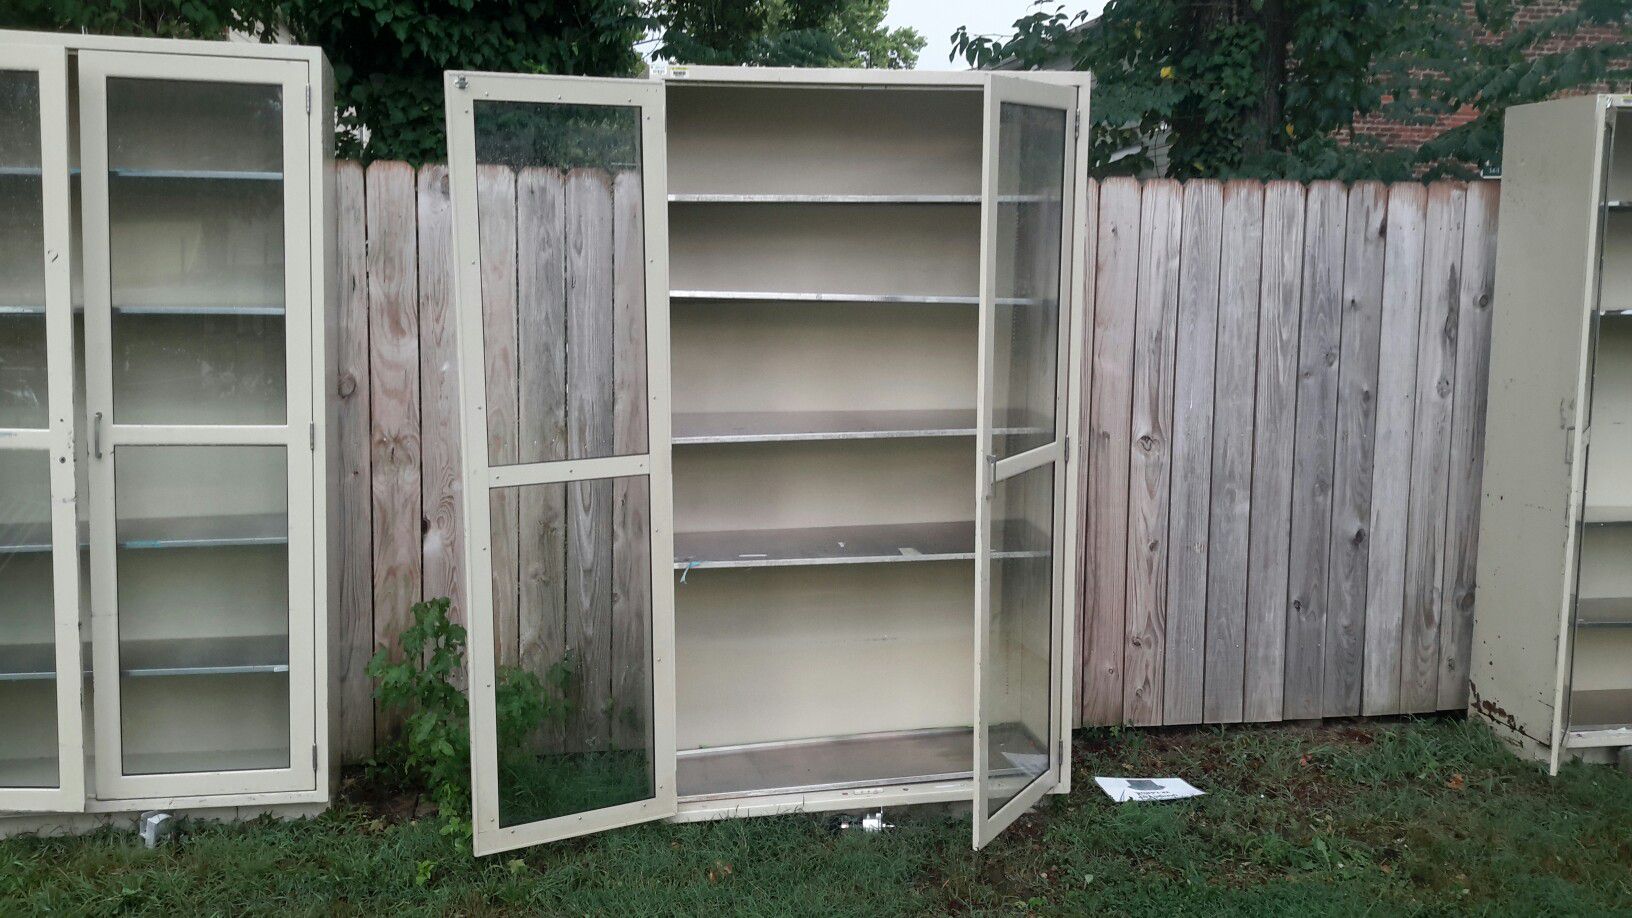 Metal carts and metal cabinets with stainless steel shelves